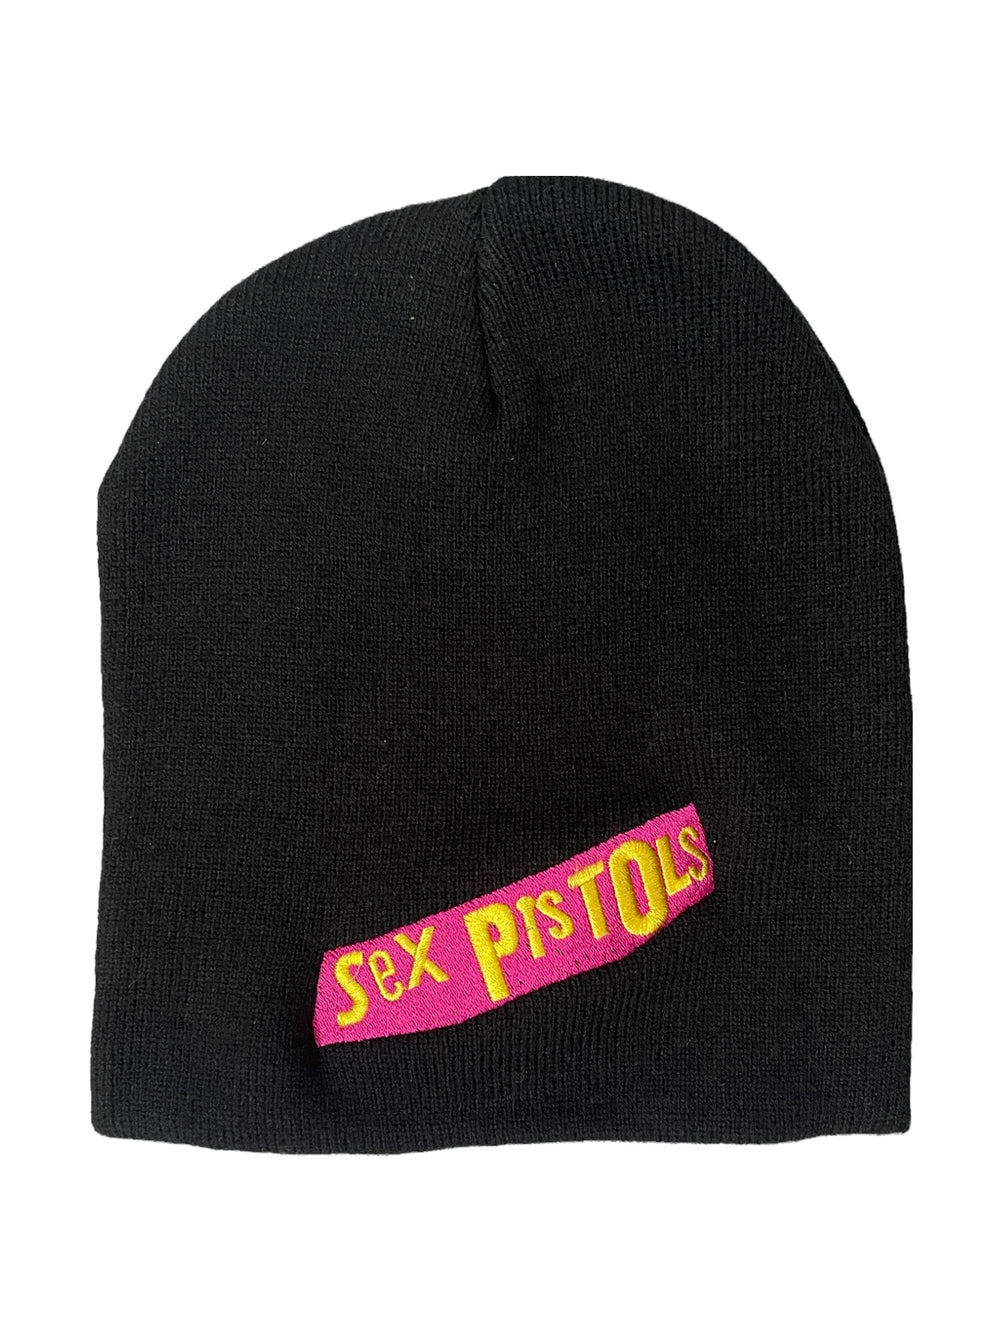 Sex Pistols The - Punk Logo Embroidery Official Beanie Hat One Size Fits All NEW